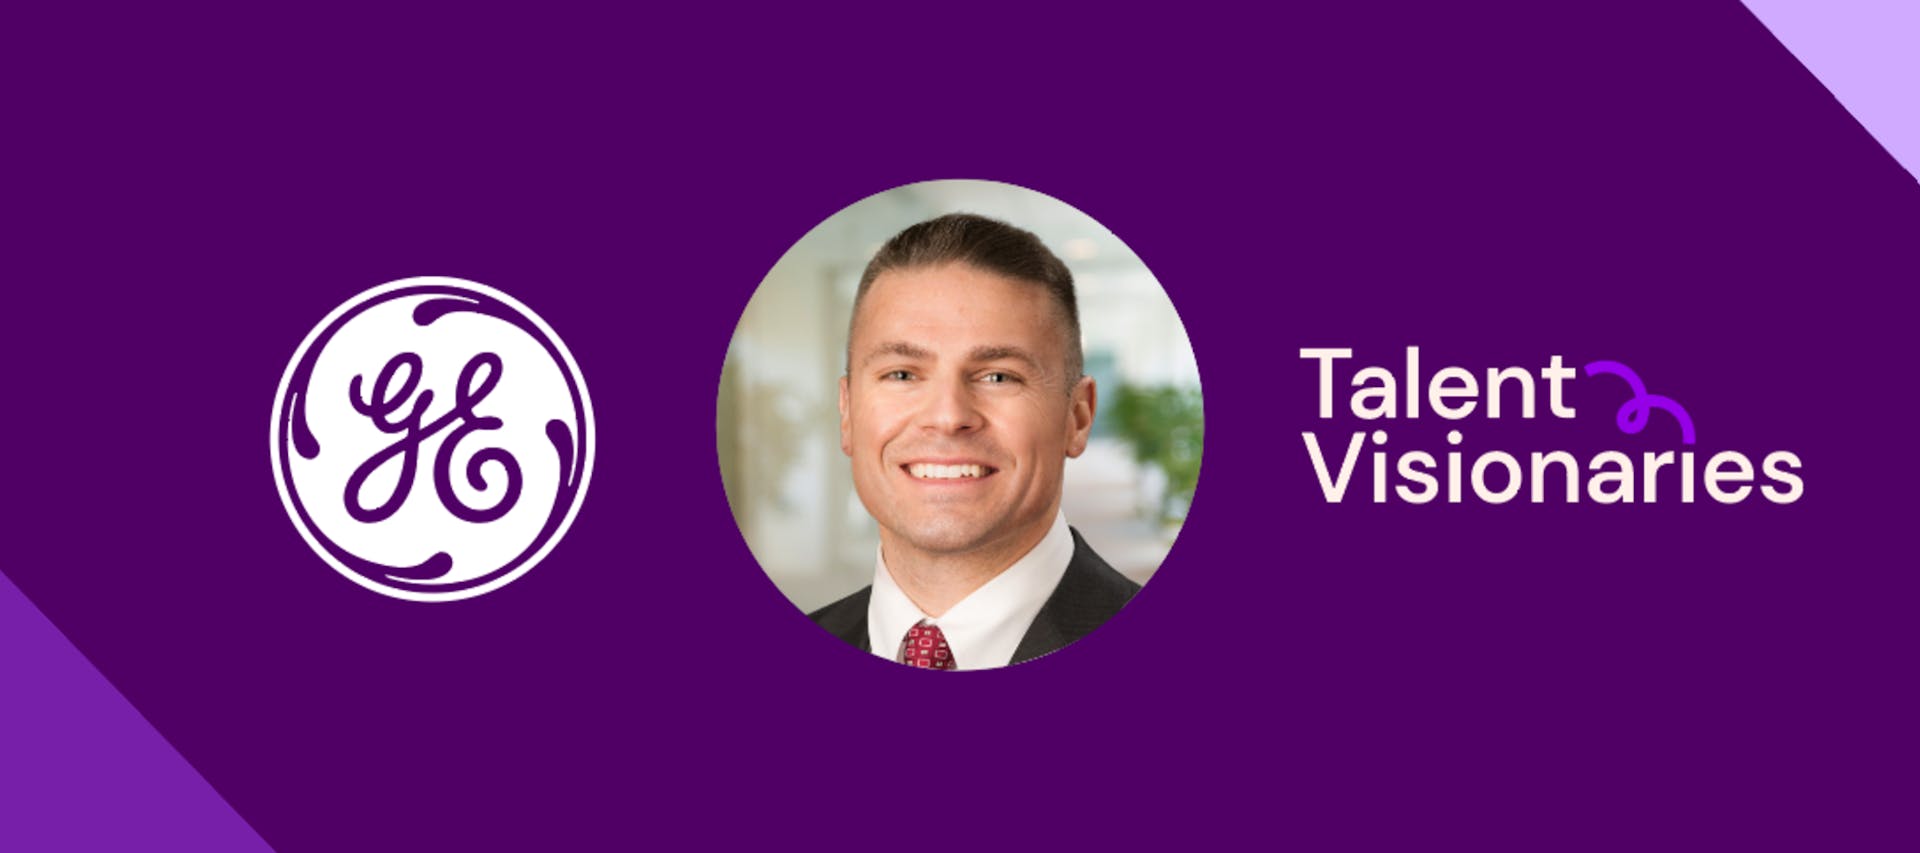 A cropped, circular headshot of Sean Murphy, Head of Global TA Operations for GE's corporate offices, with a GE logo to the left, and "Talent Visionaries" logo to the right, all on a dark purple background.